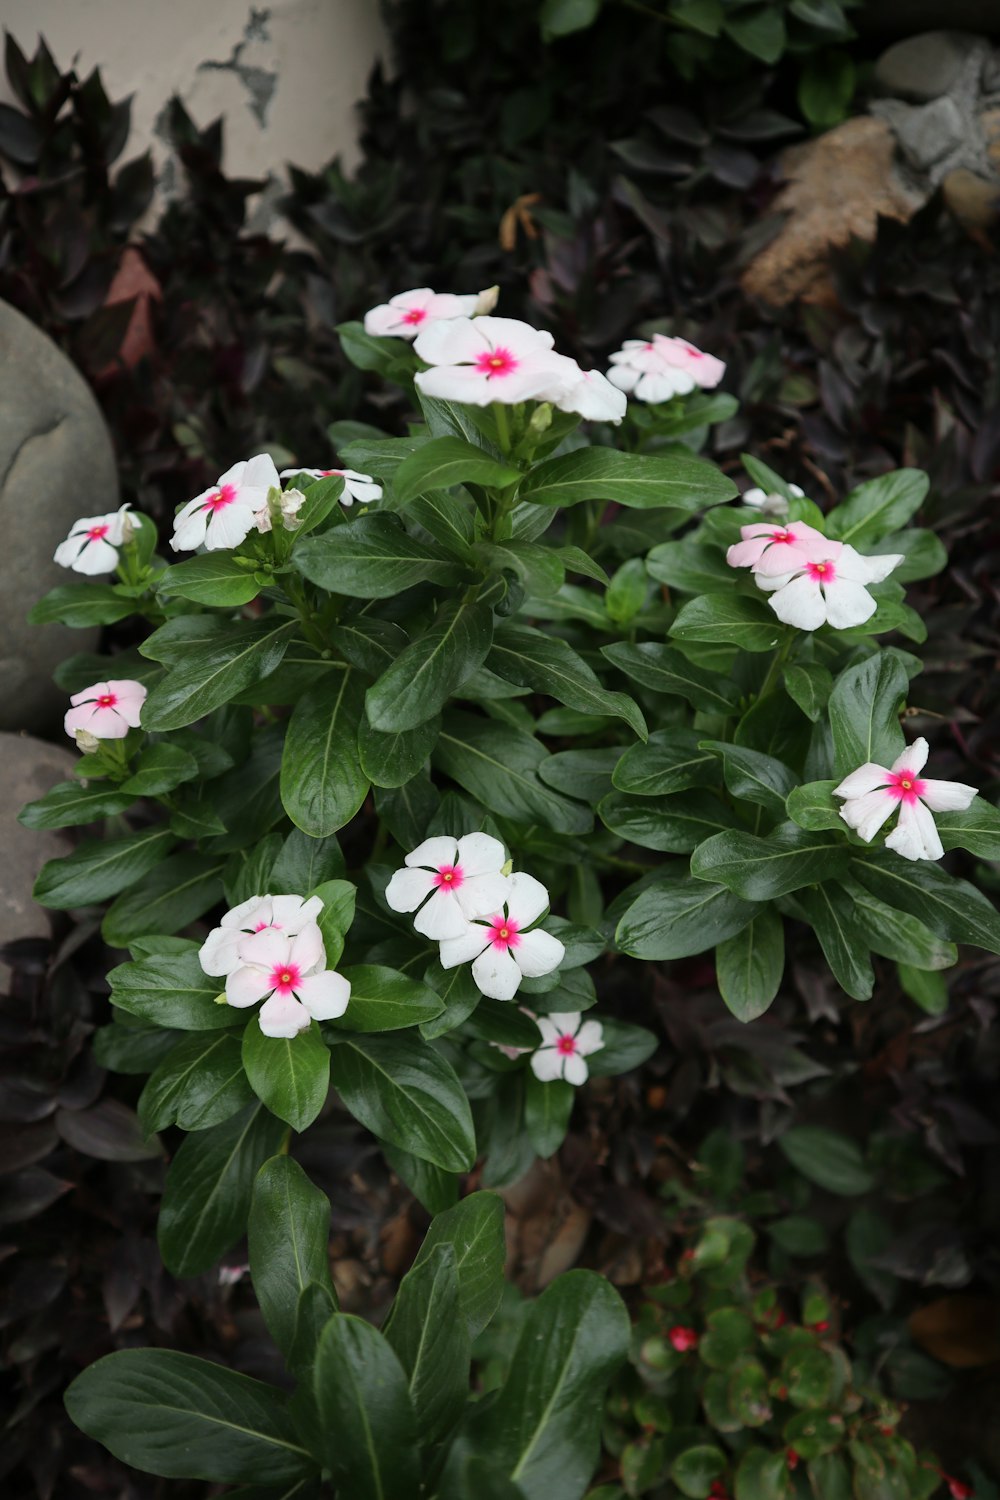 a group of white and red flowers in a garden